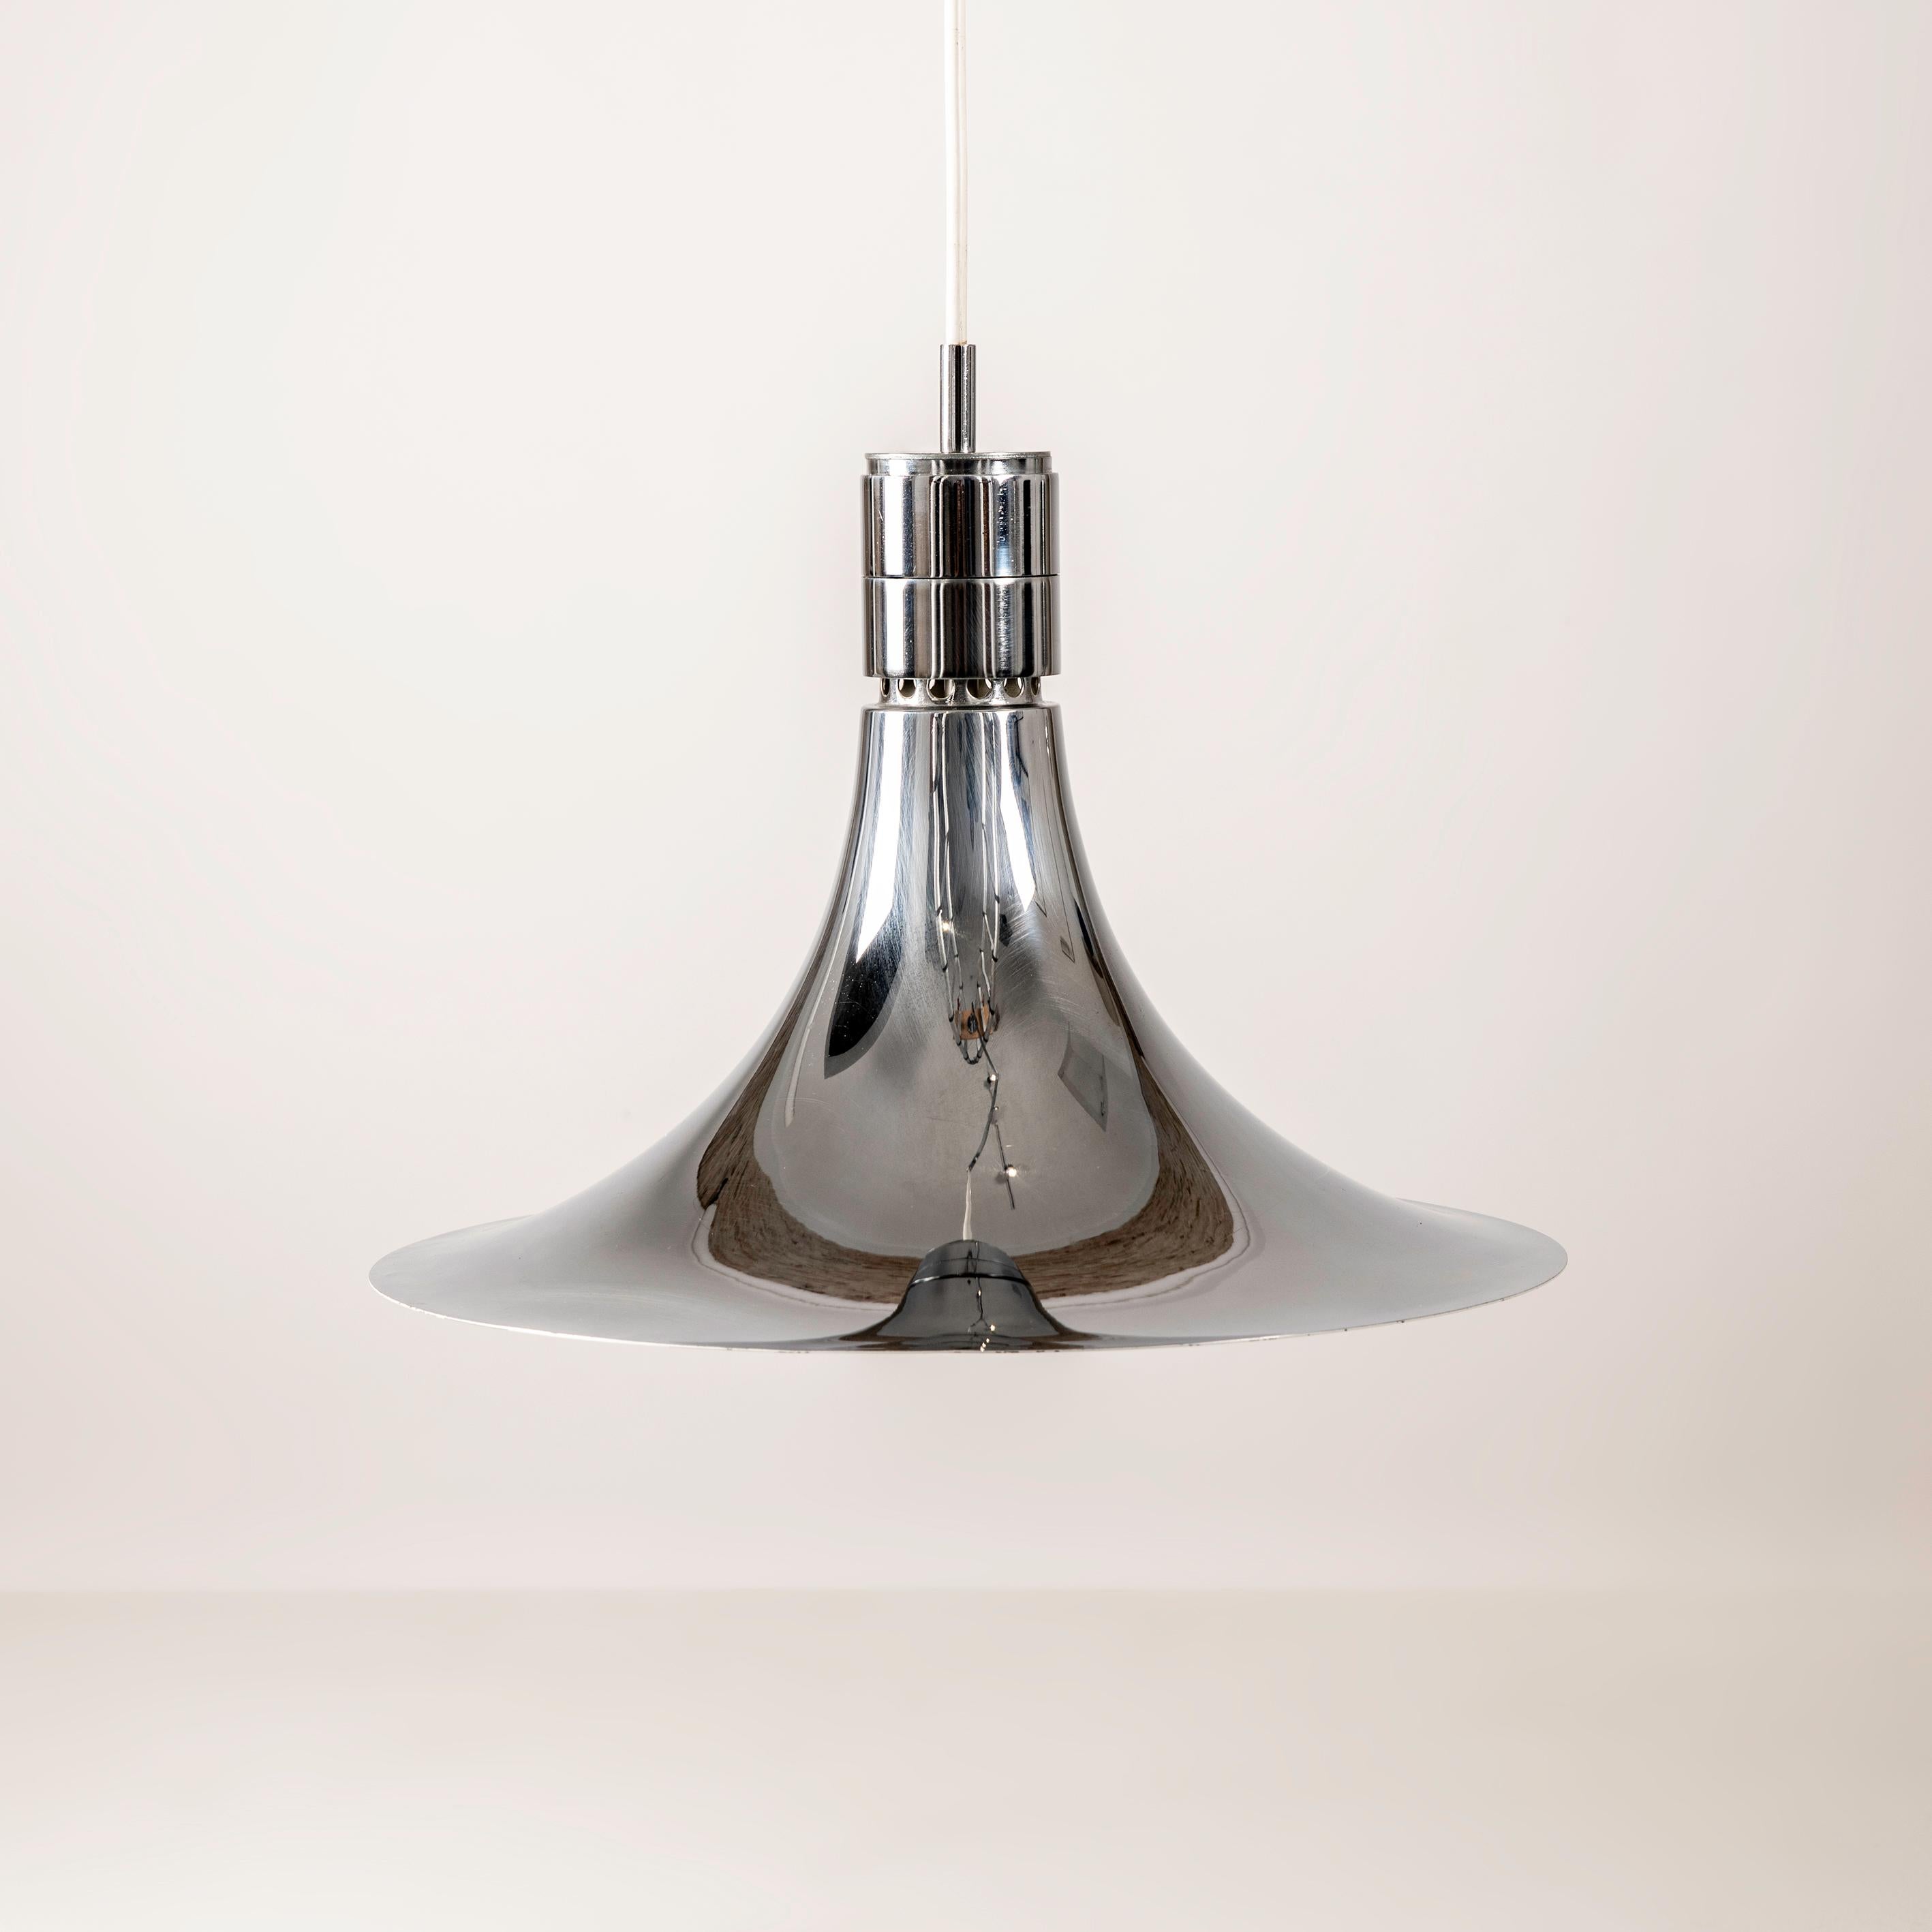 Mid-20th Century AM/AS Ceiling Lamp with Chromed Swing Arm by Franco Albini for Sirrah, 1960s For Sale